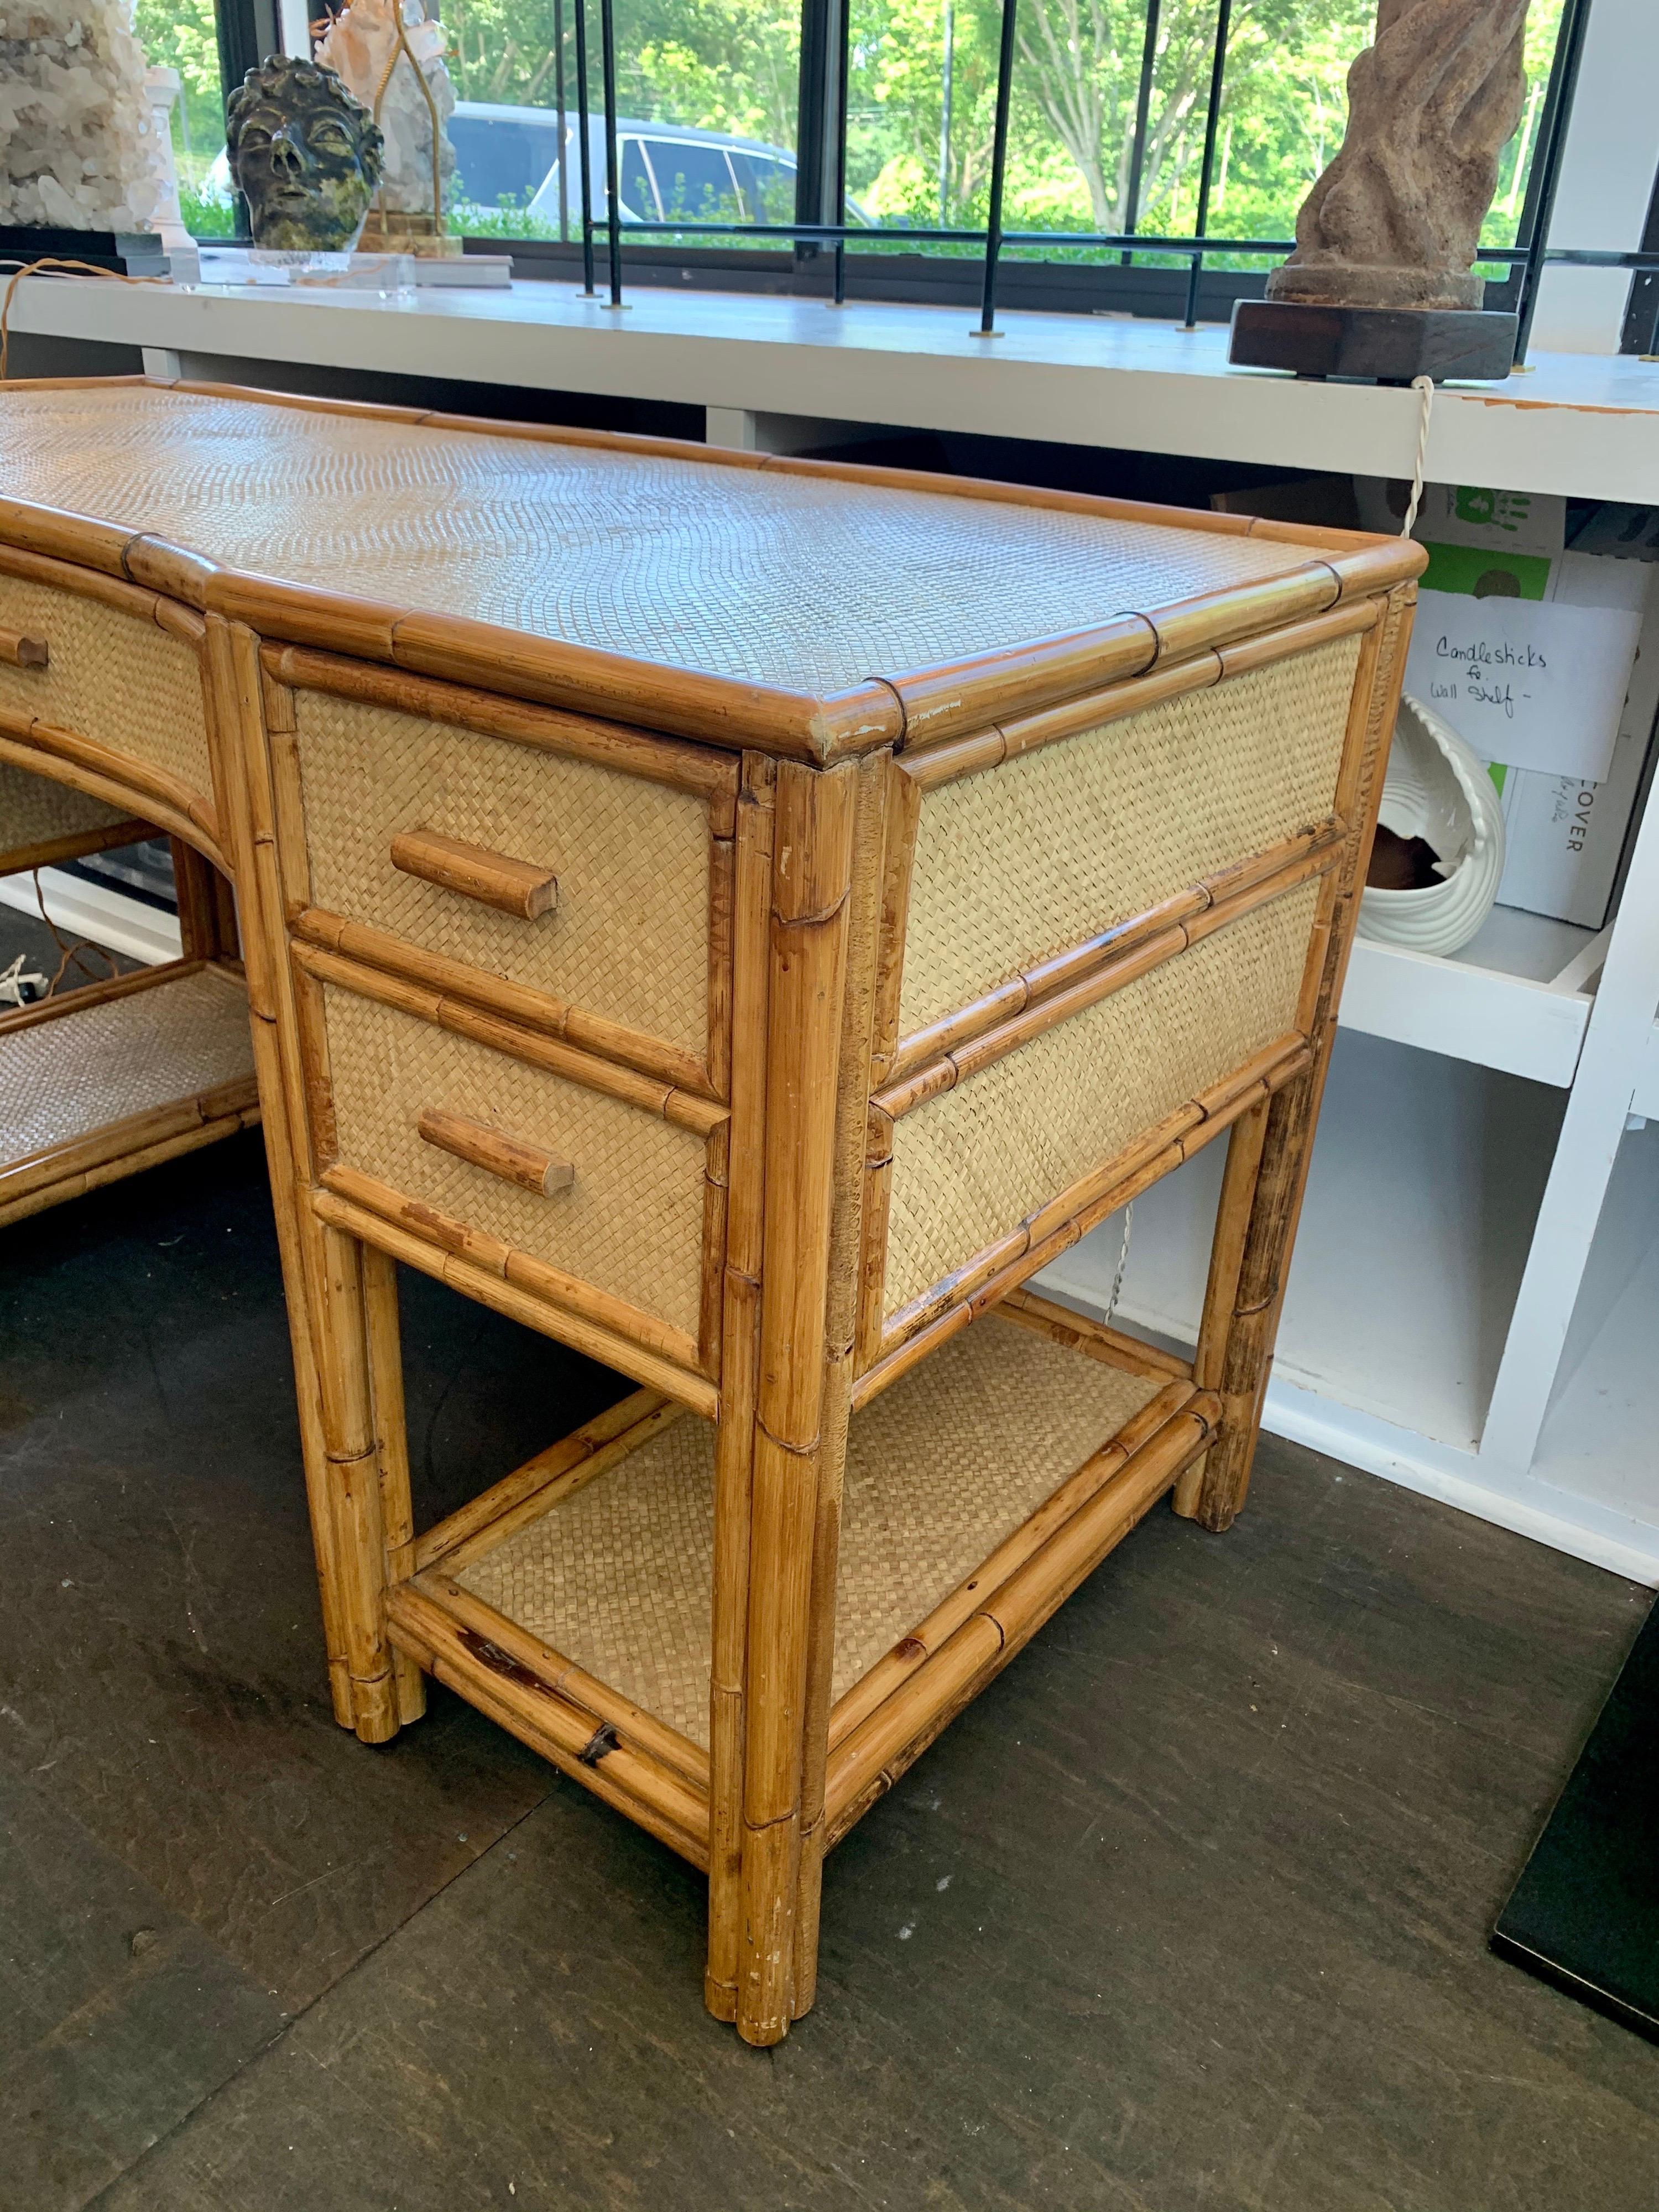 Mid-20th Century Bamboo and Grass Cloth Desk with Drawers